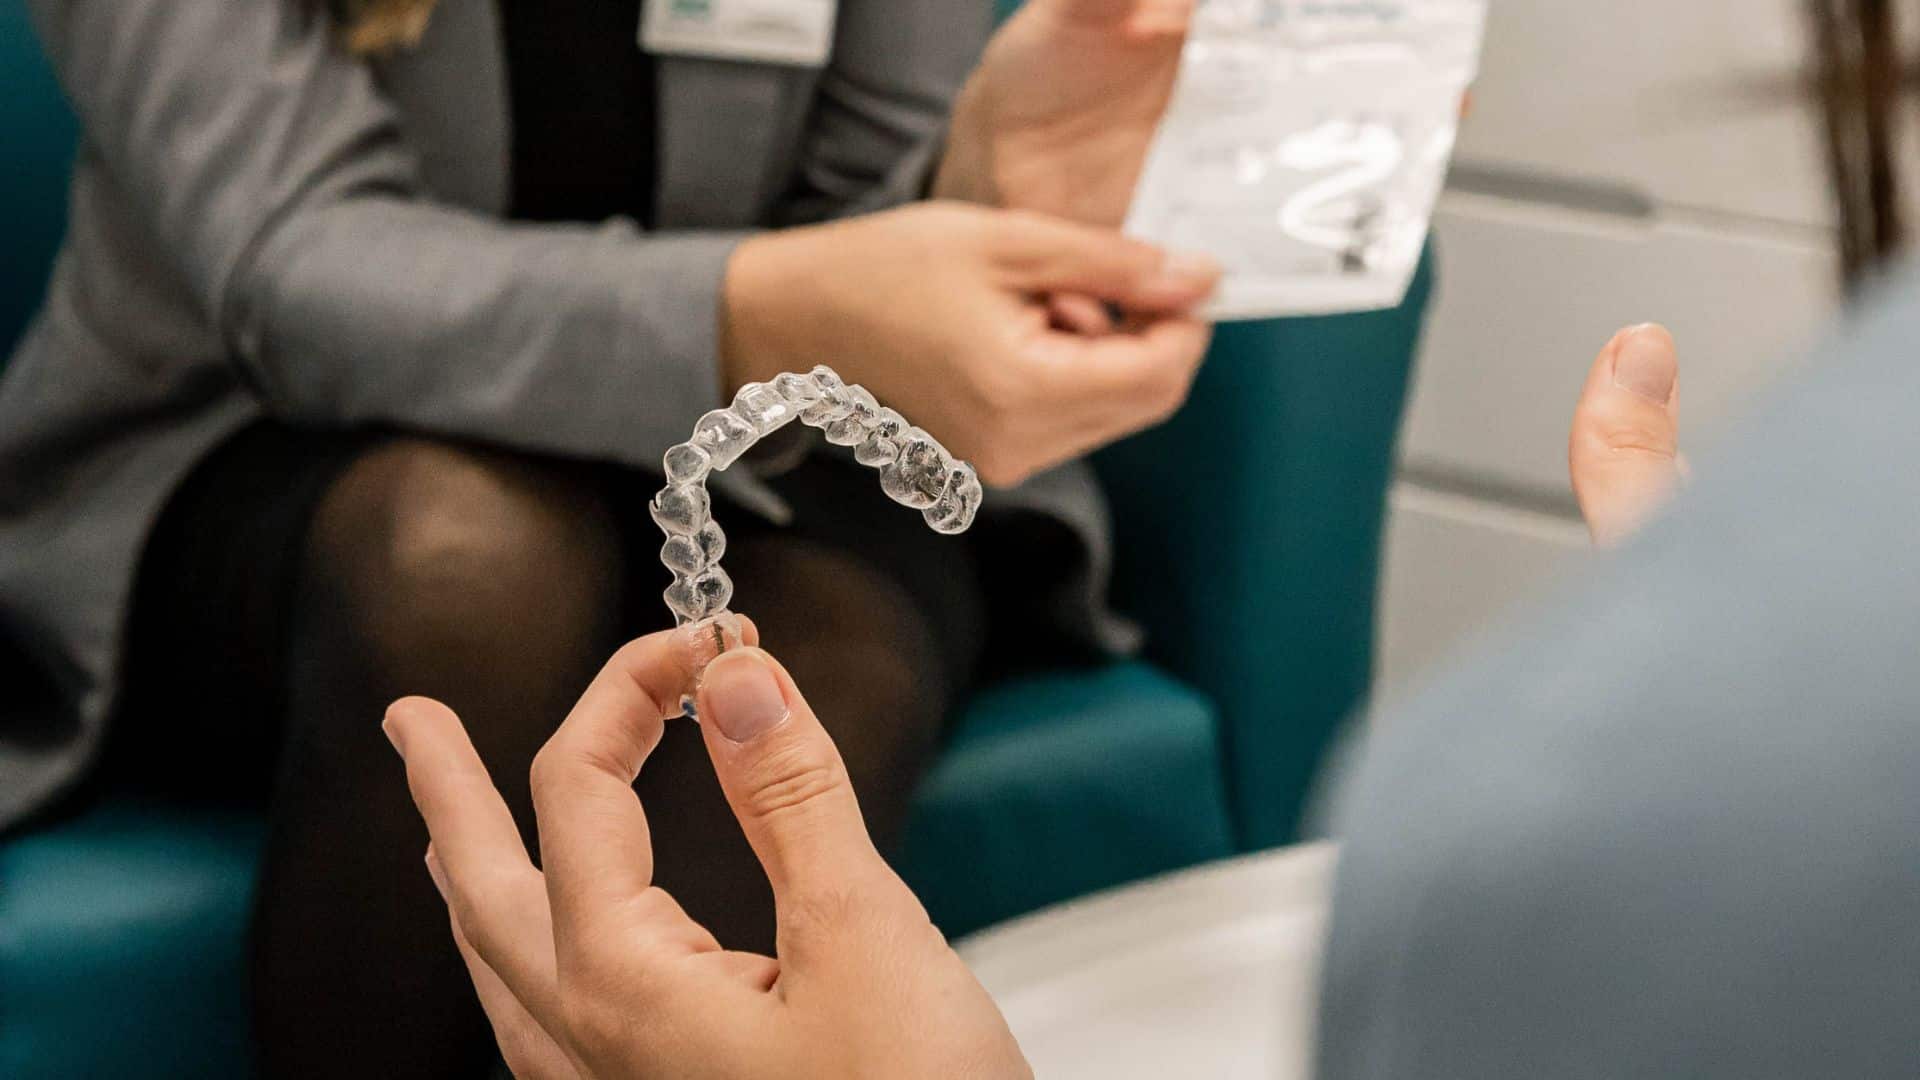 Cosmetic dentistry clear aligners Invisalign